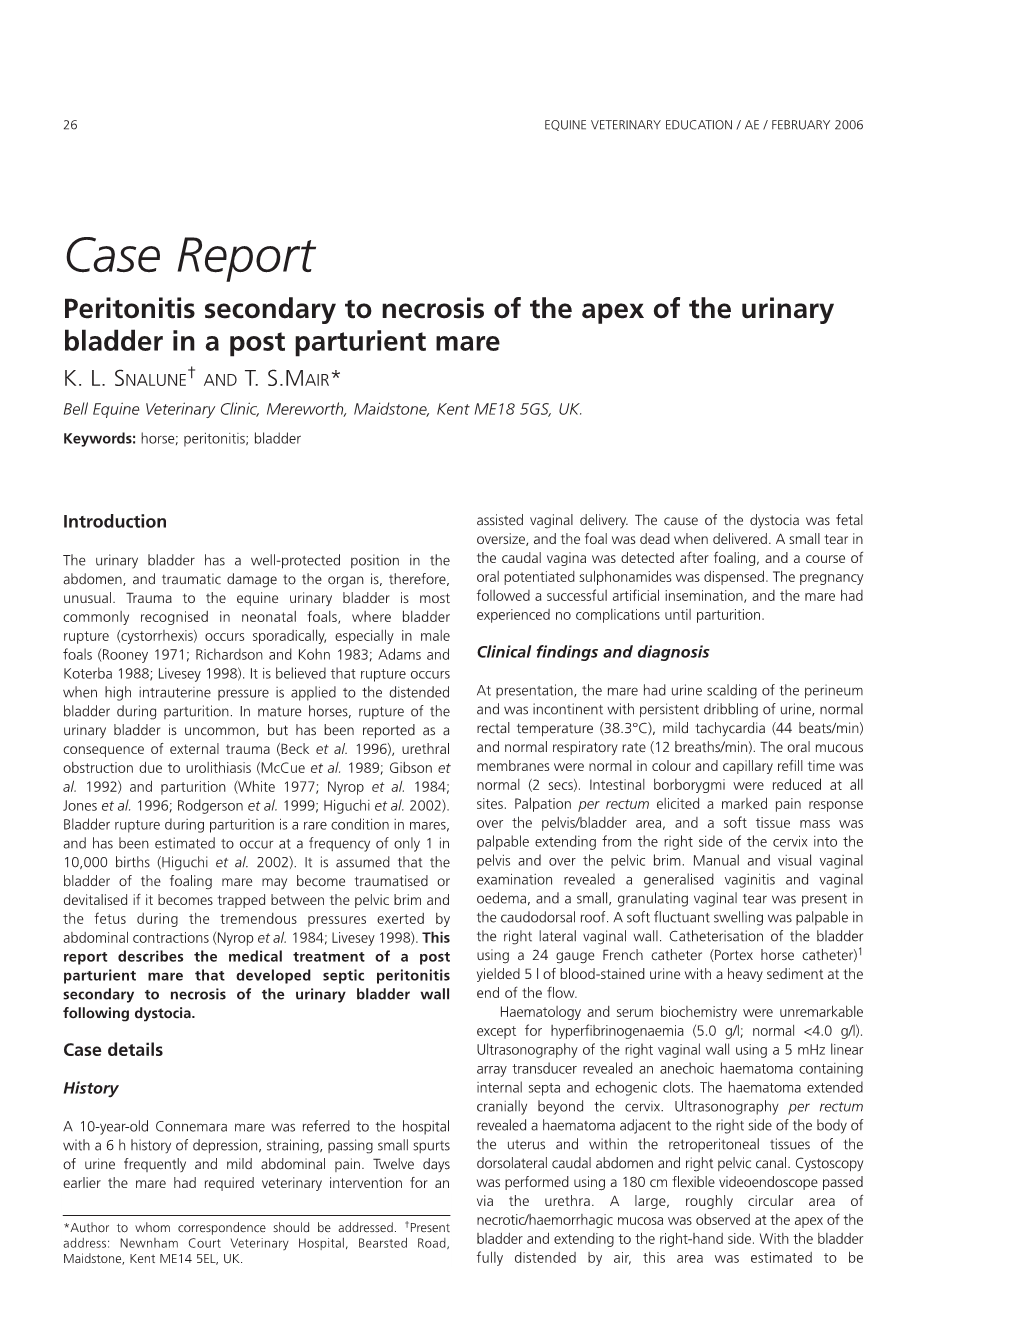 Case Report Peritonitis Secondary to Necrosis of the Apex of the Urinary Bladder in a Post Parturient Mare K